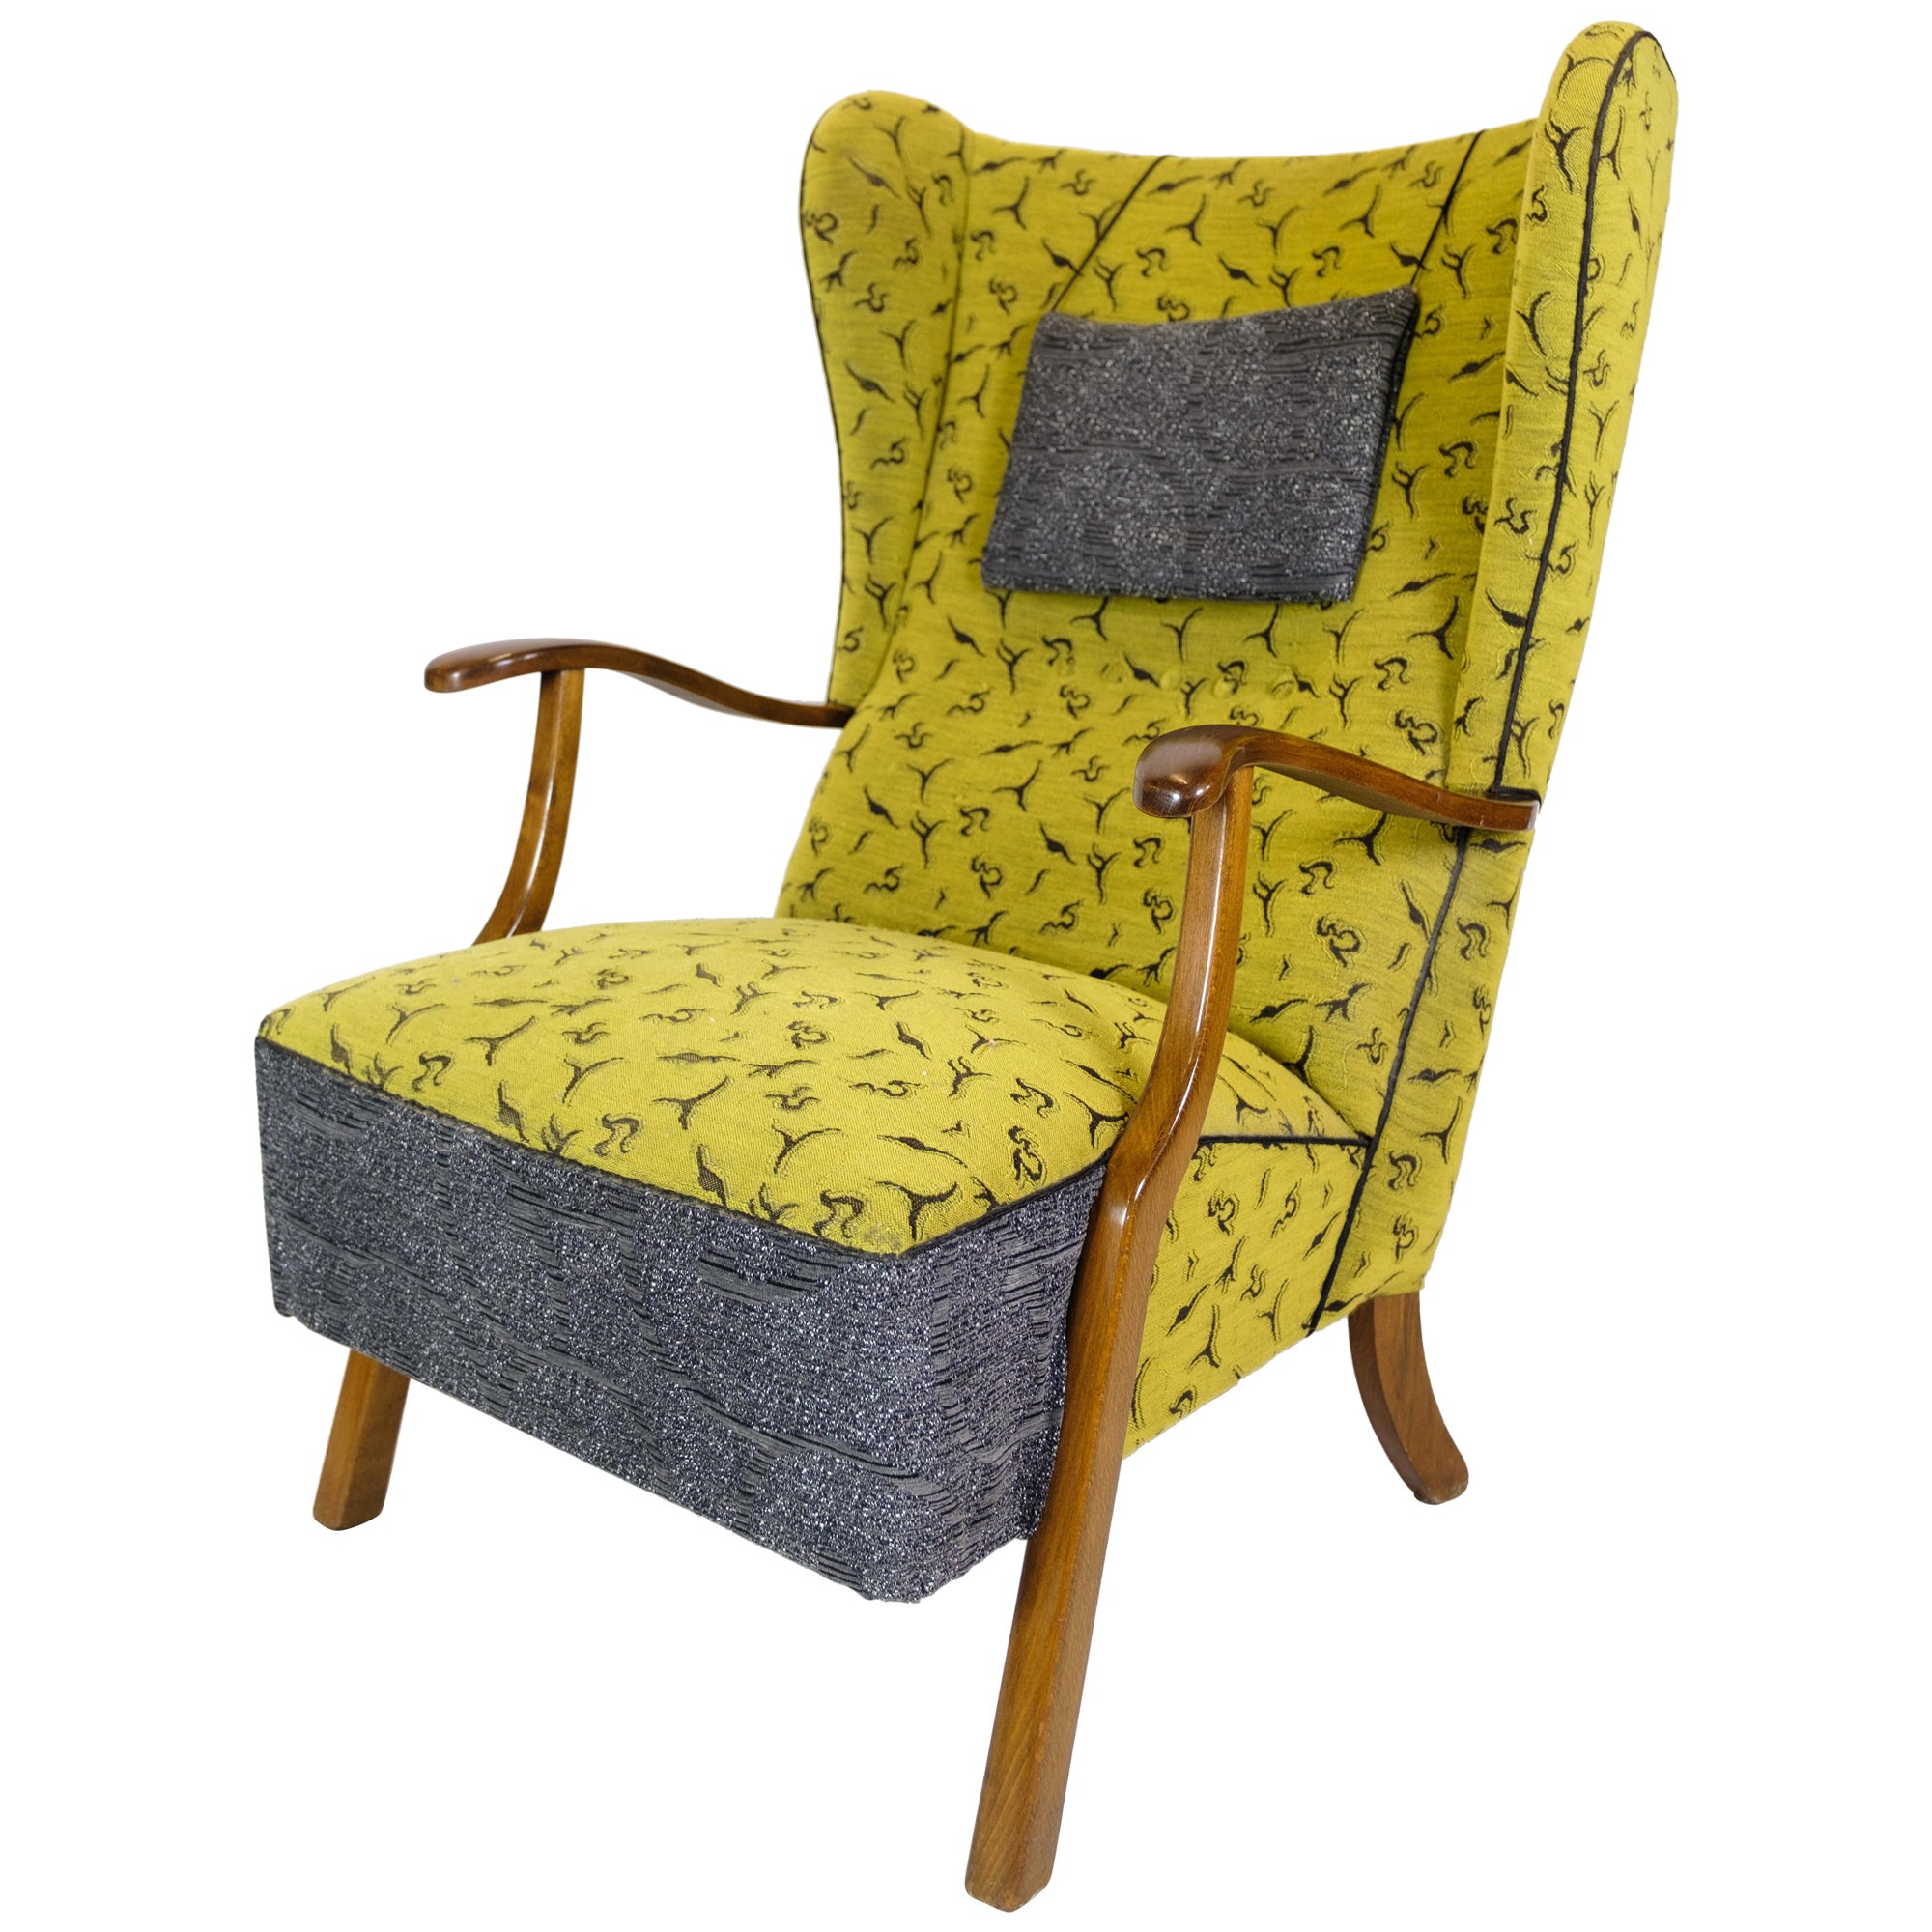 Armchair In Polished Nutwood By Danish Carpenter in Colorful fabric from 1940's For Sale